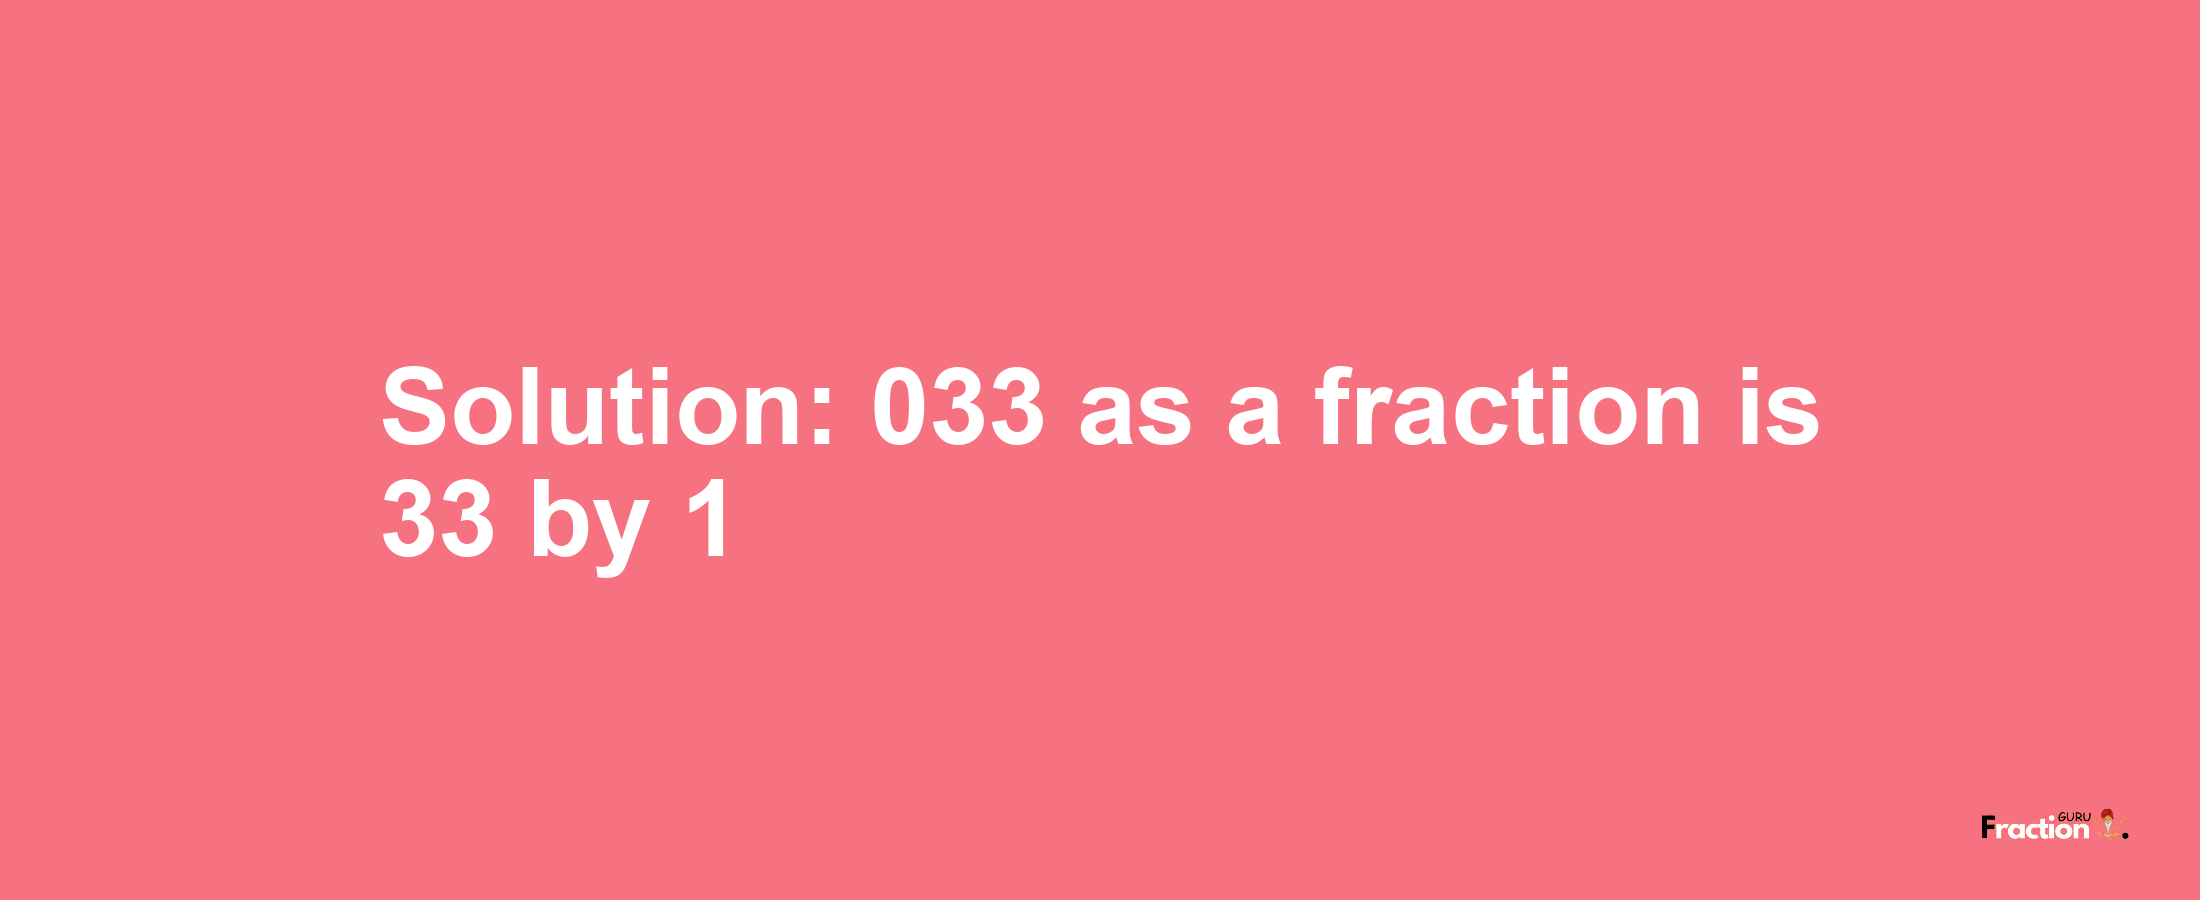 Solution:033 as a fraction is 33/1